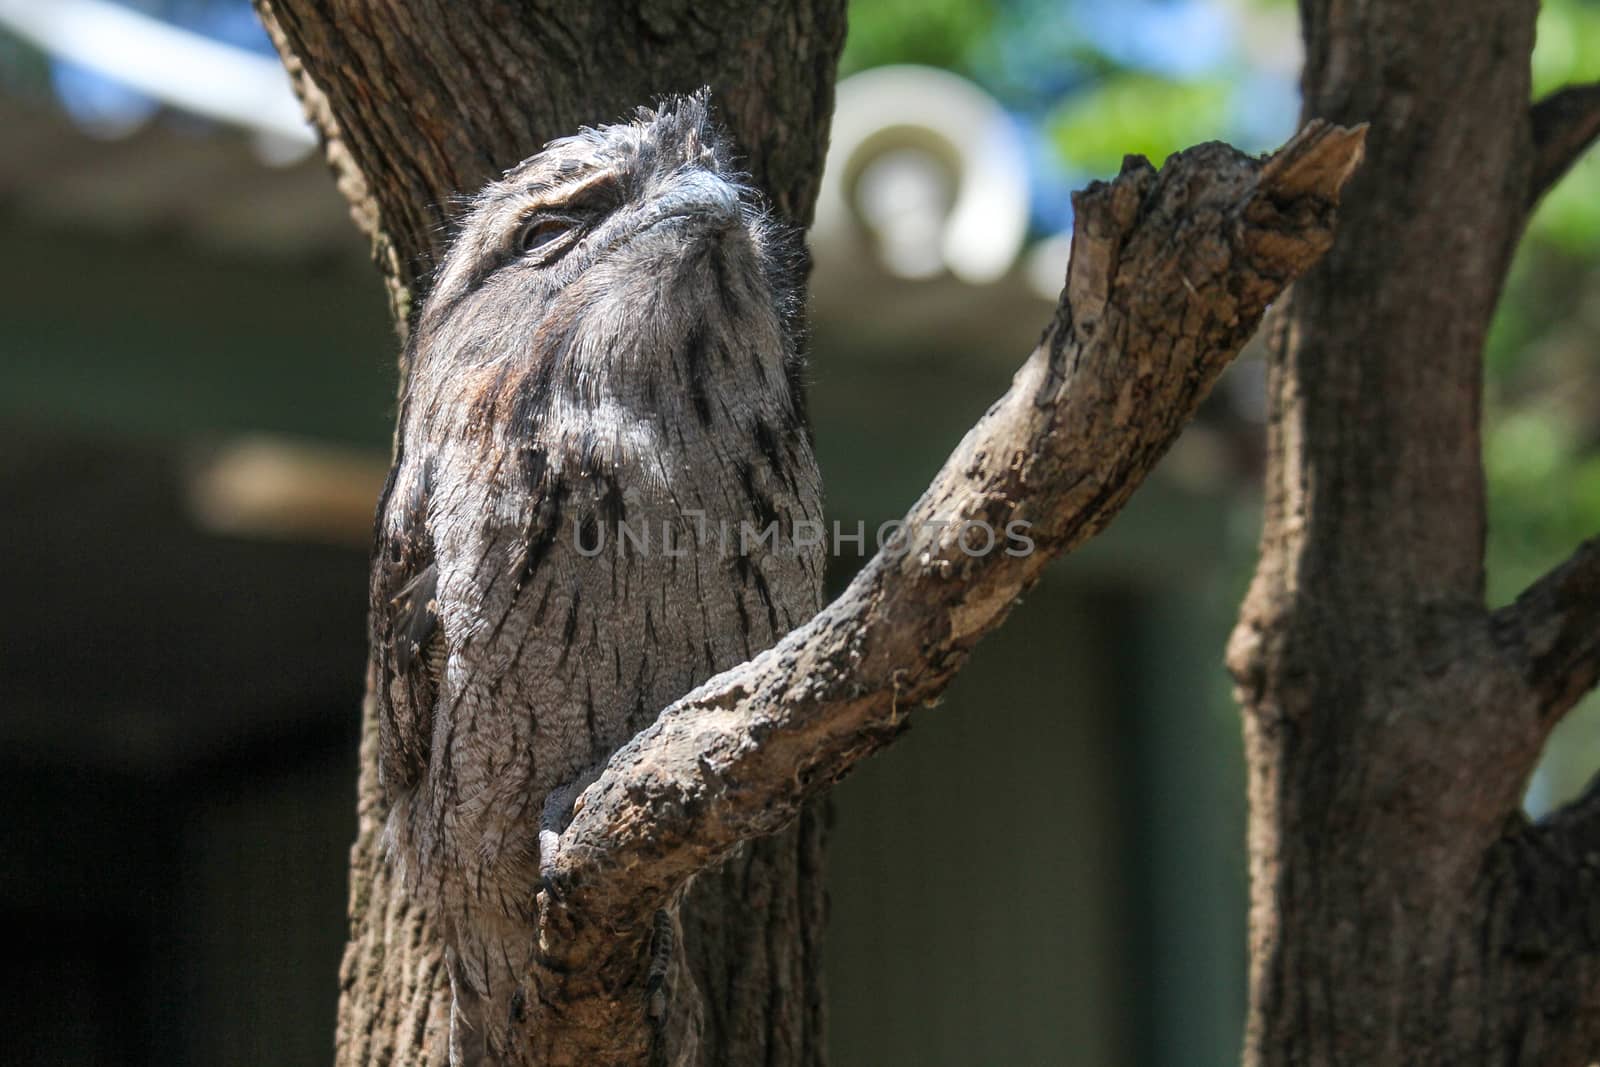 Australian frogmouth nightjar hiding with his feather camouflage on the branch, Sydney Australia